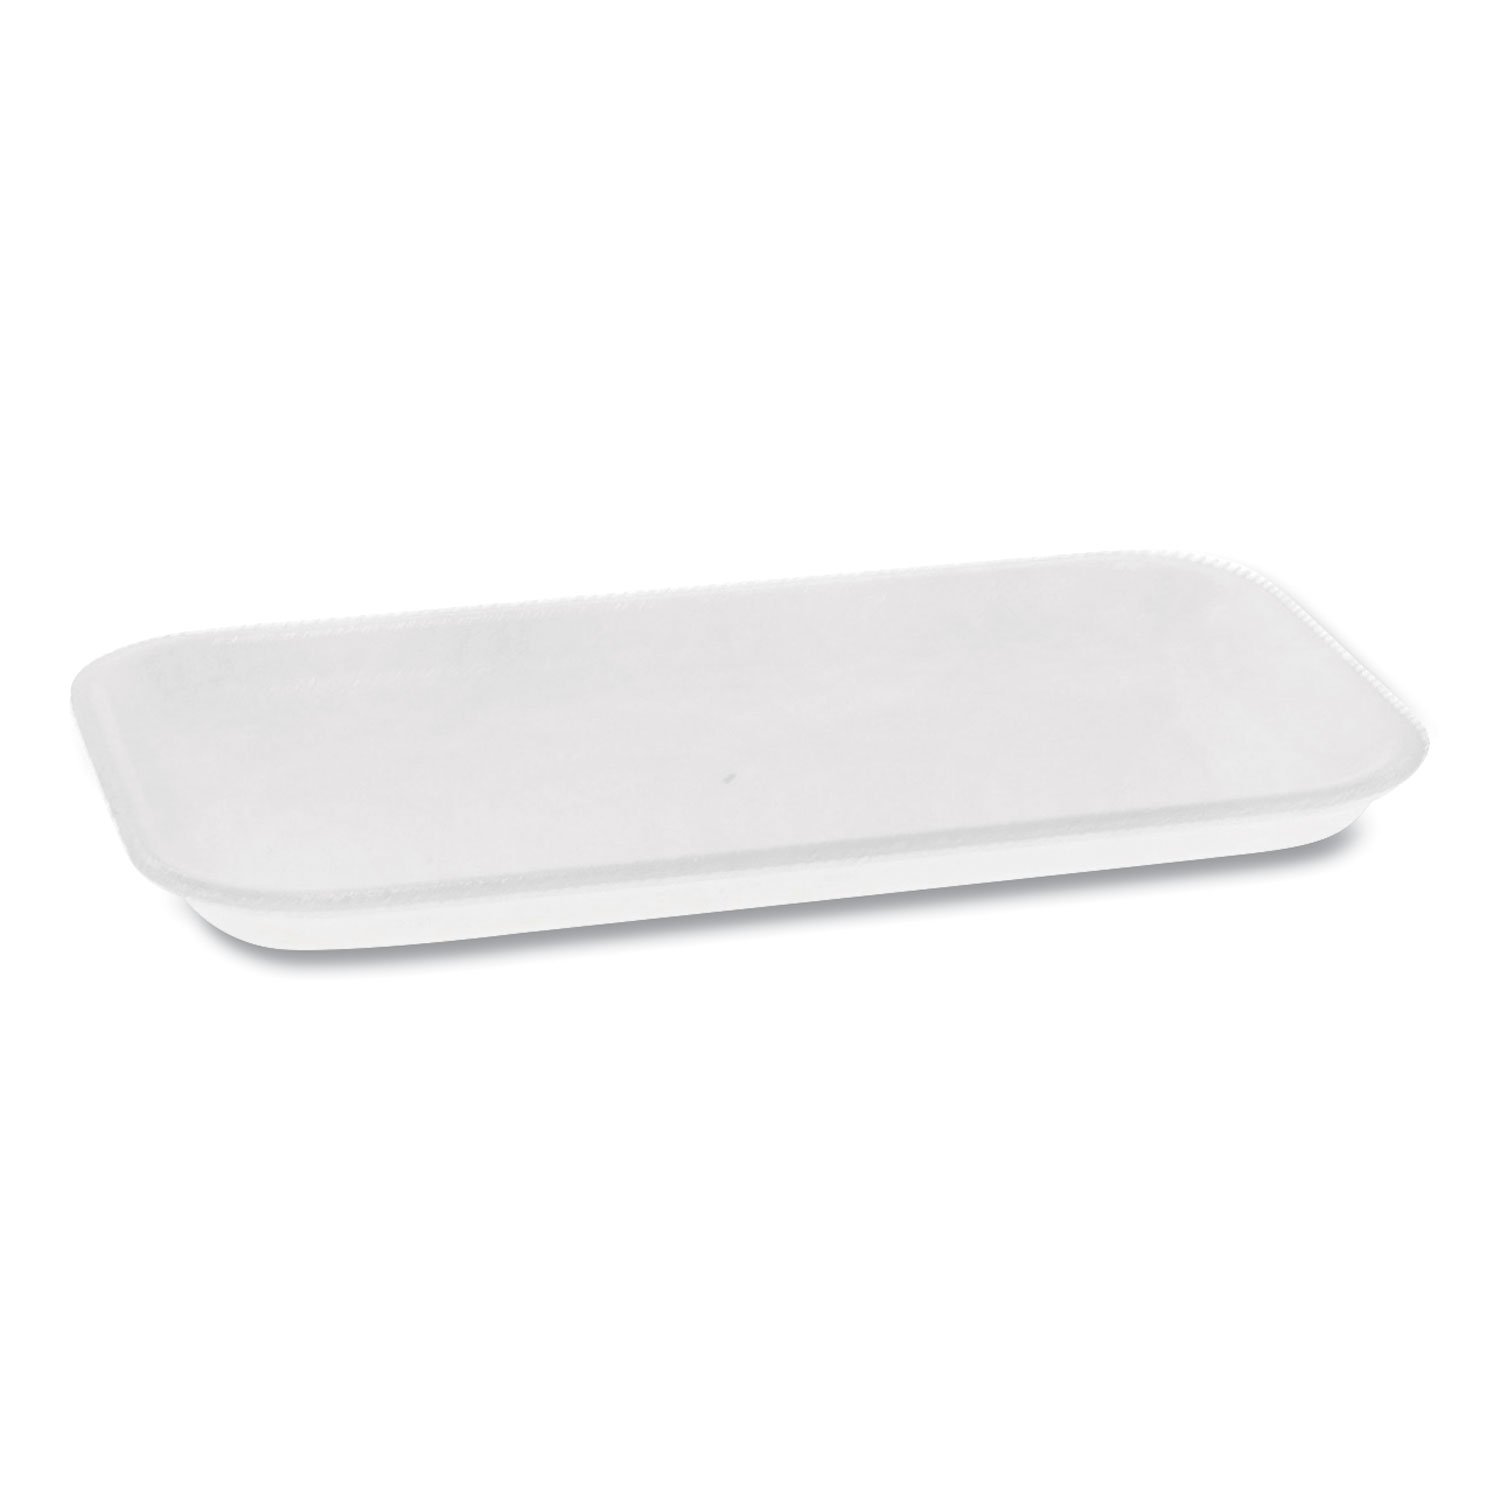 Pactiv Meat Tray, #17 Shallow, 8.3 x 4.8 x 0.65, White, 1,000/Carton